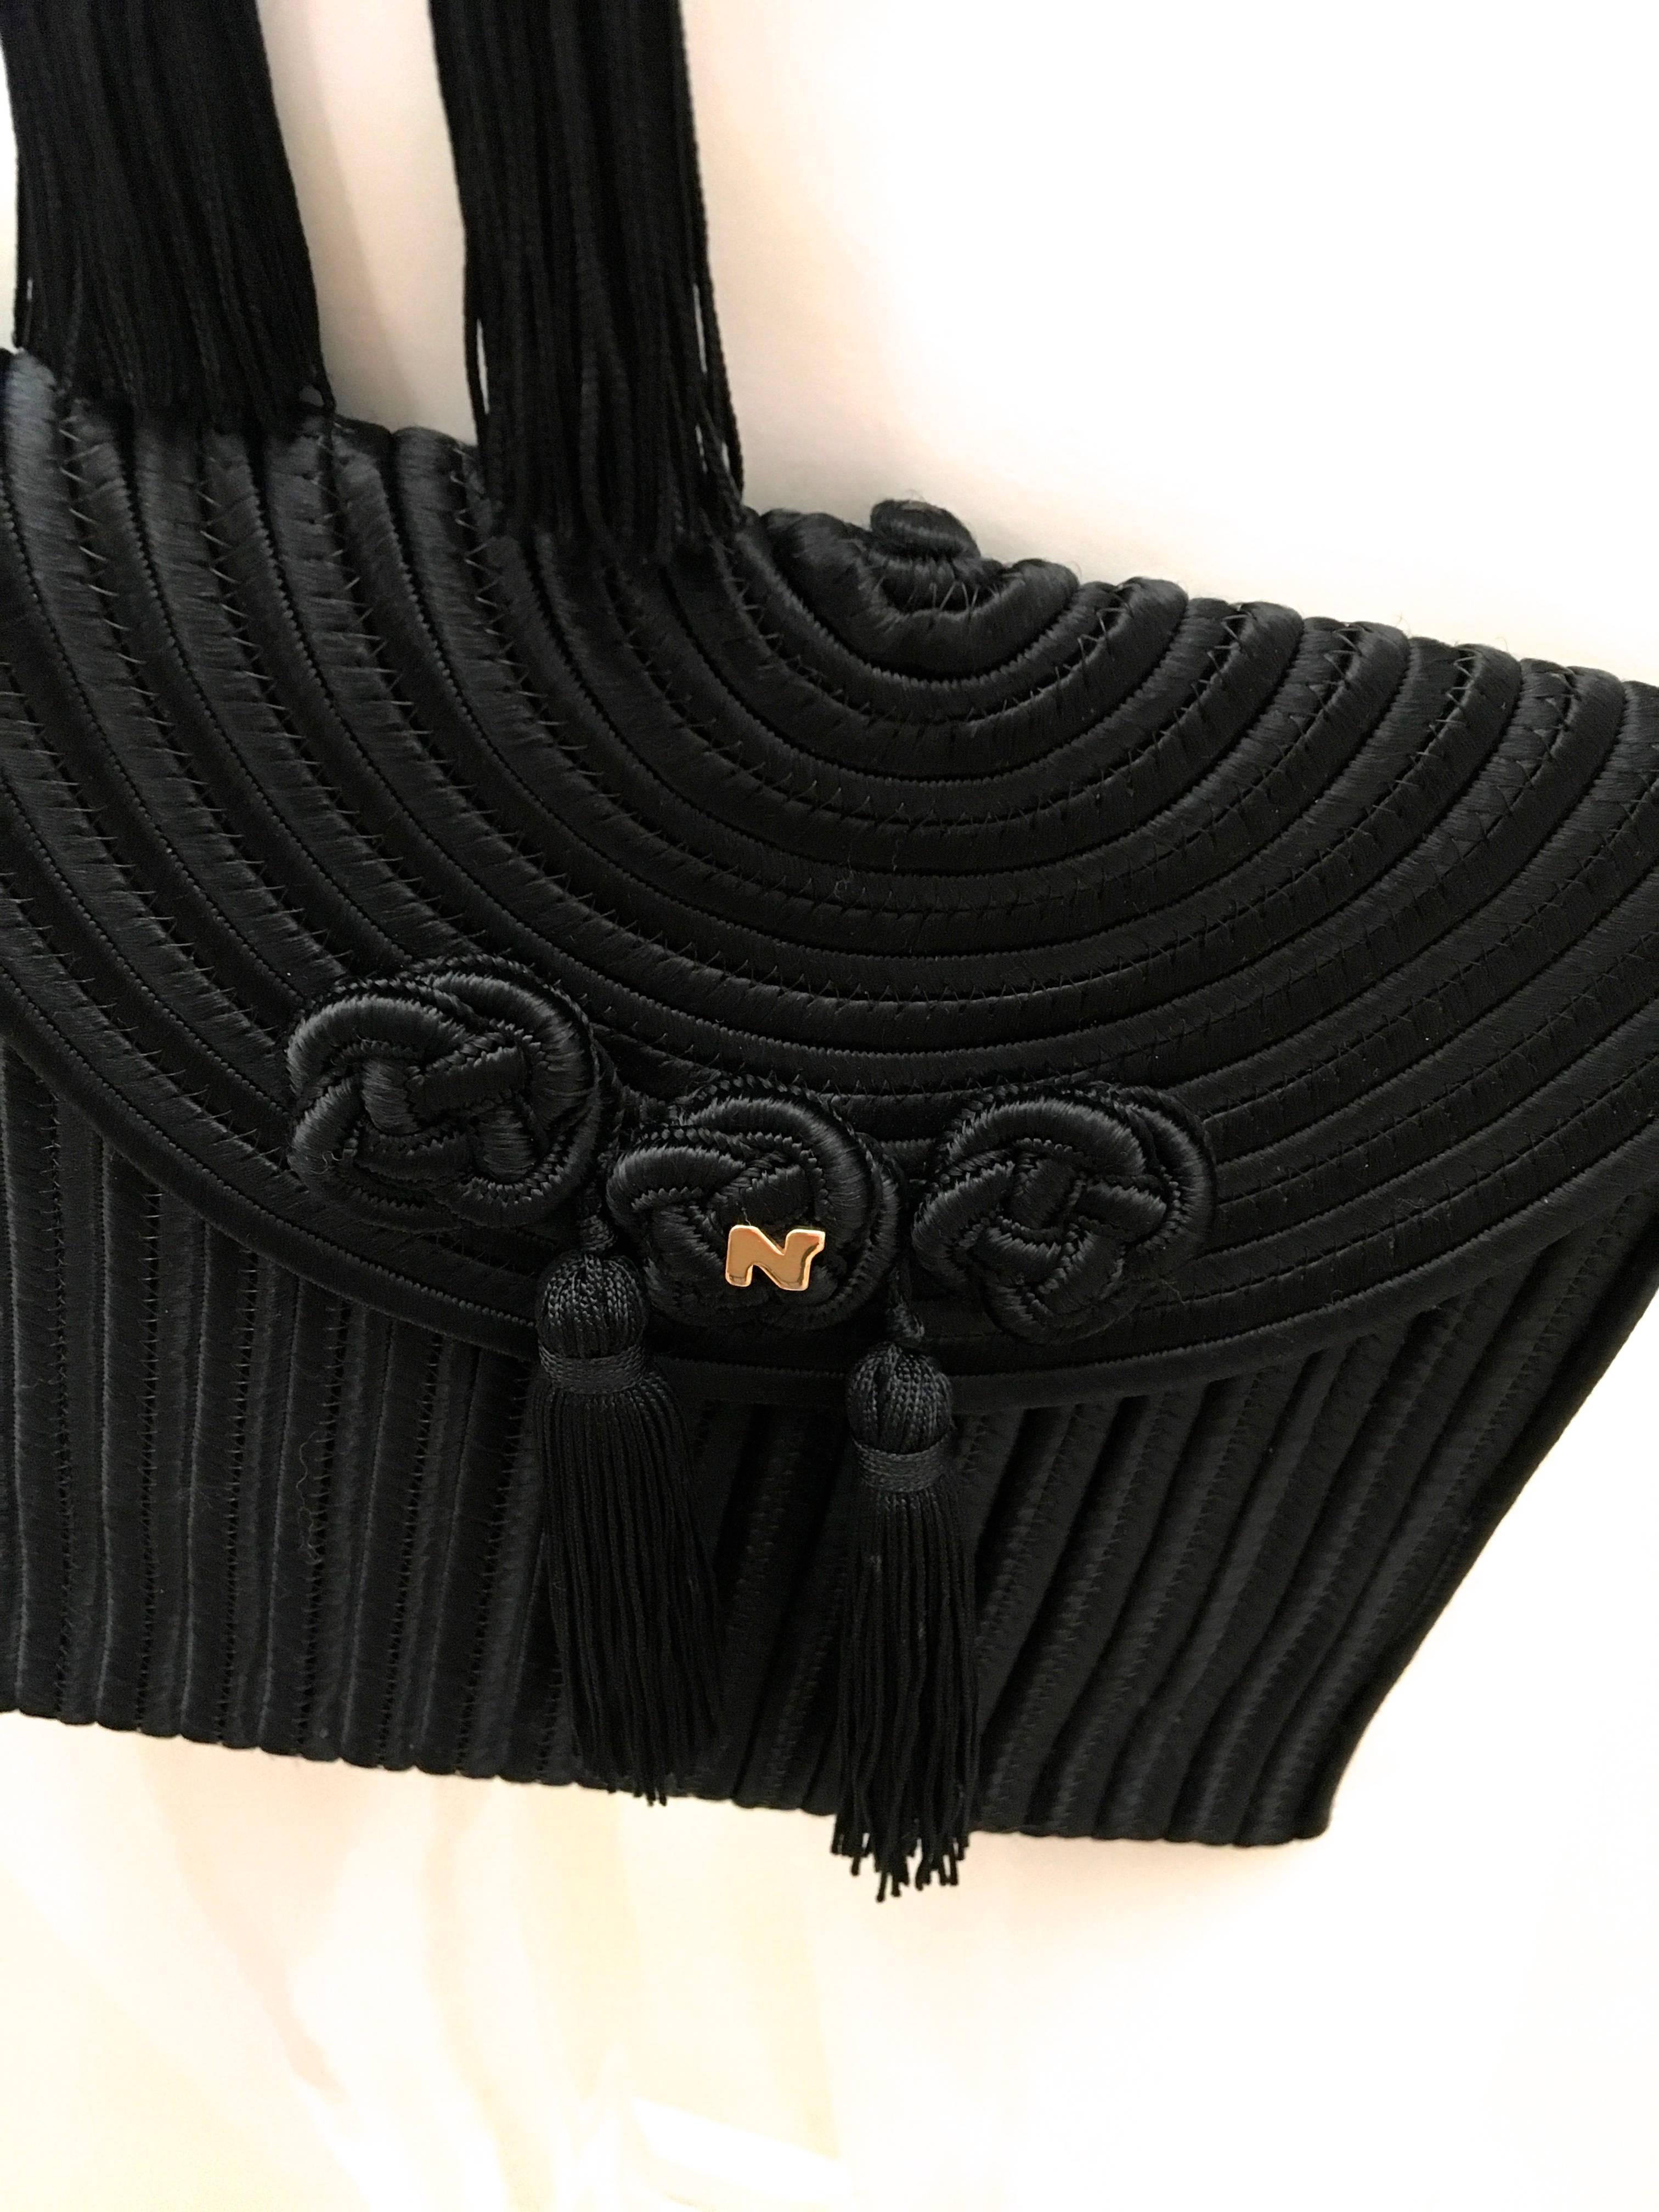 Nina Ricci Purse with Matching Belt - Rare Mint Condition For Sale 2